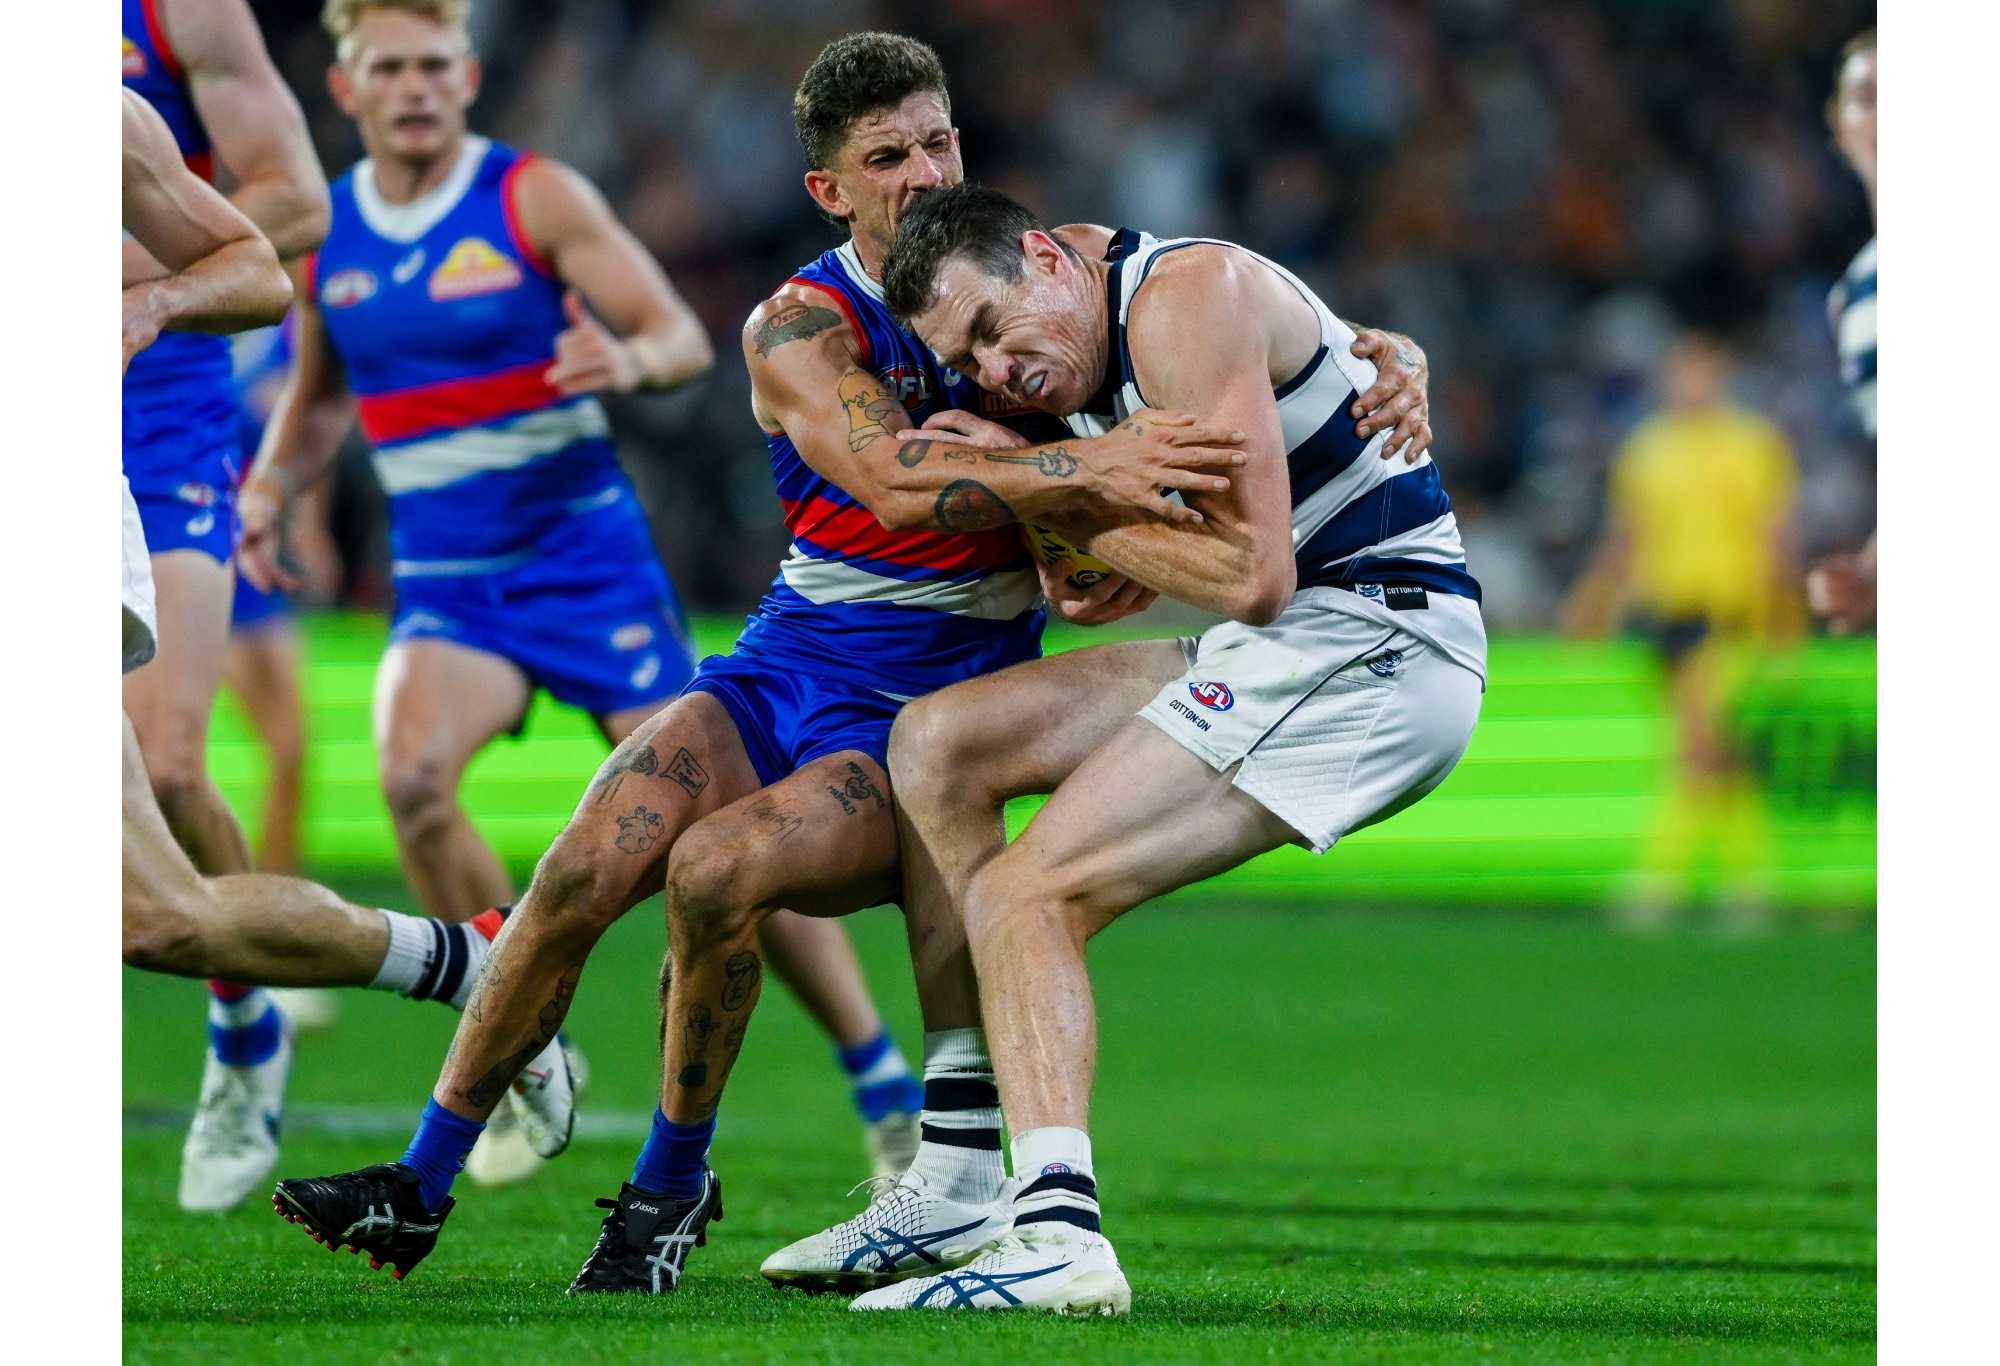 Jeremy Cameron of the Cats tackled by Tom Liberatore of the Bulldogs during the round four AFL match between Western Bulldogs and Geelong Cats at Adelaide Oval, on April 06, 2024, in Adelaide, Australia. (Photo by Mark Brake/Getty Images)